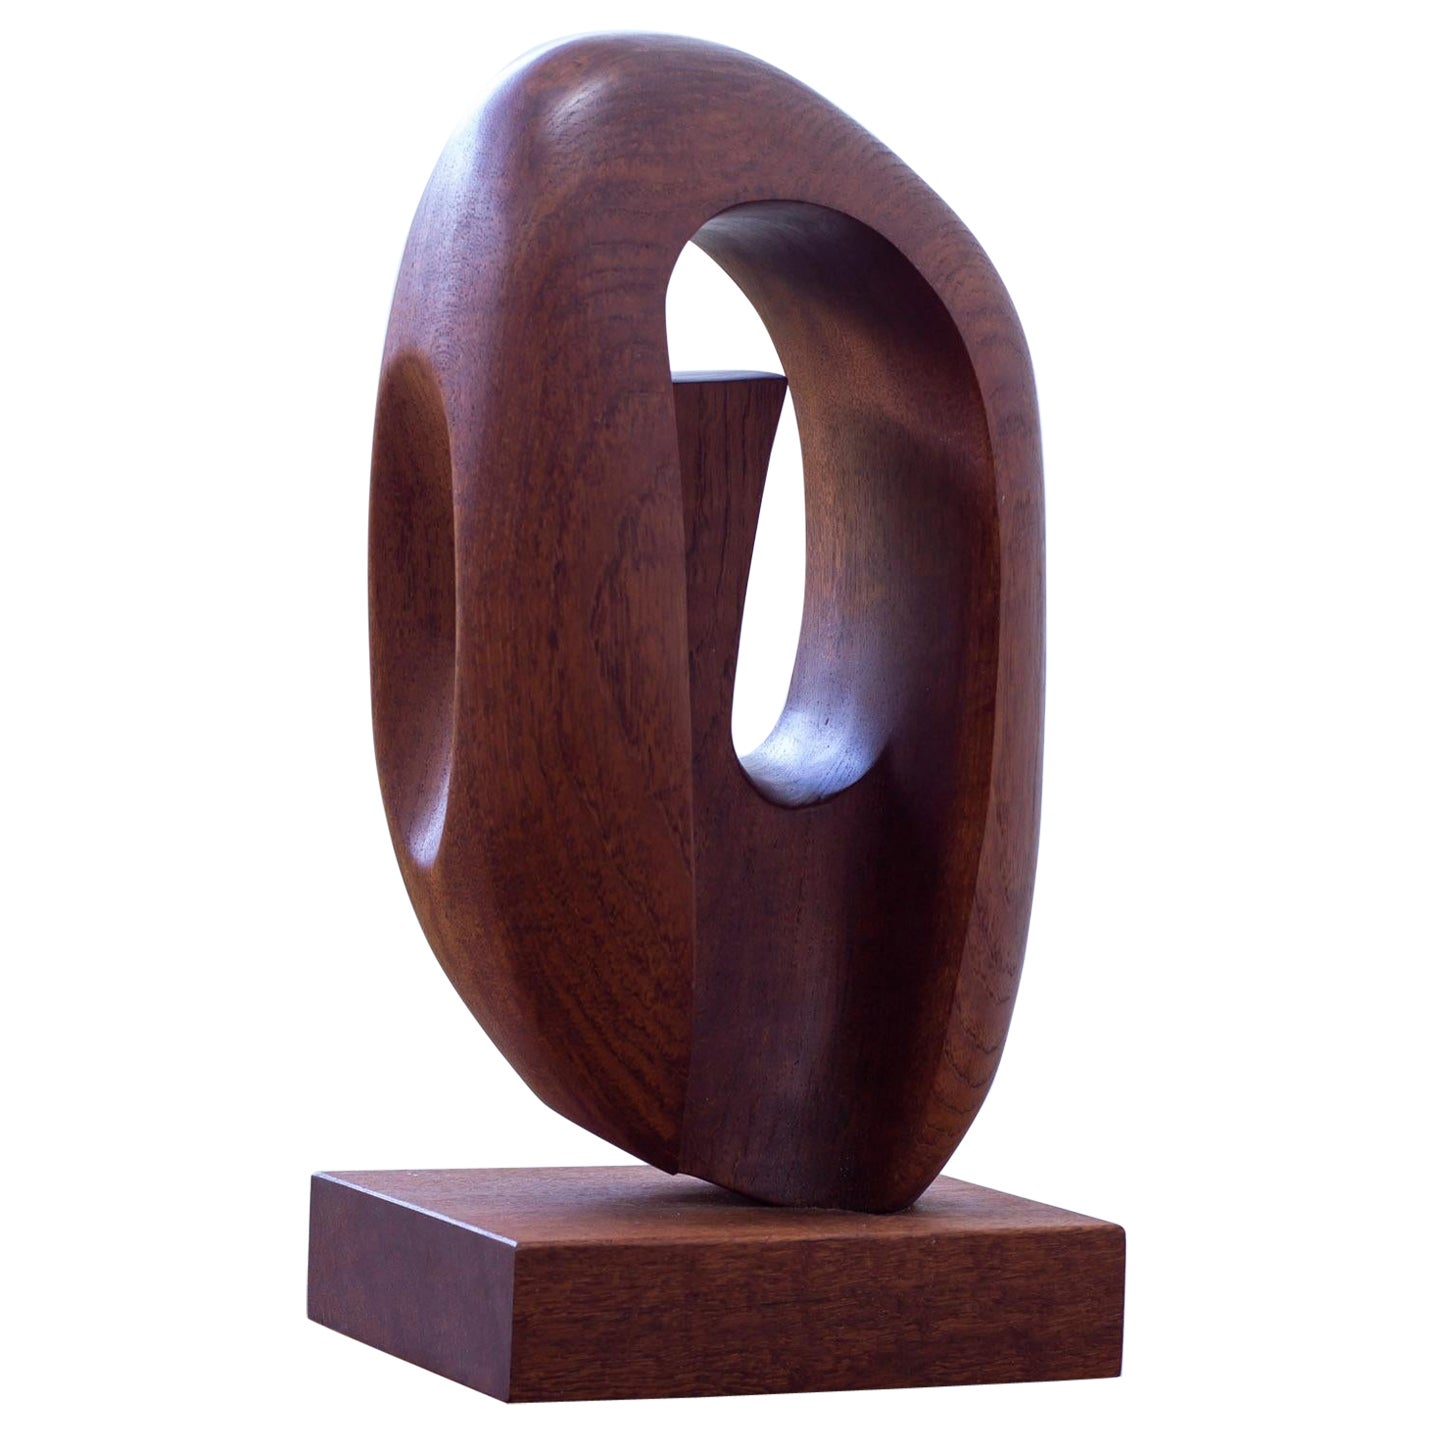 Organic sculpture in the manner of Moore by Swedish wood carver, 1950s